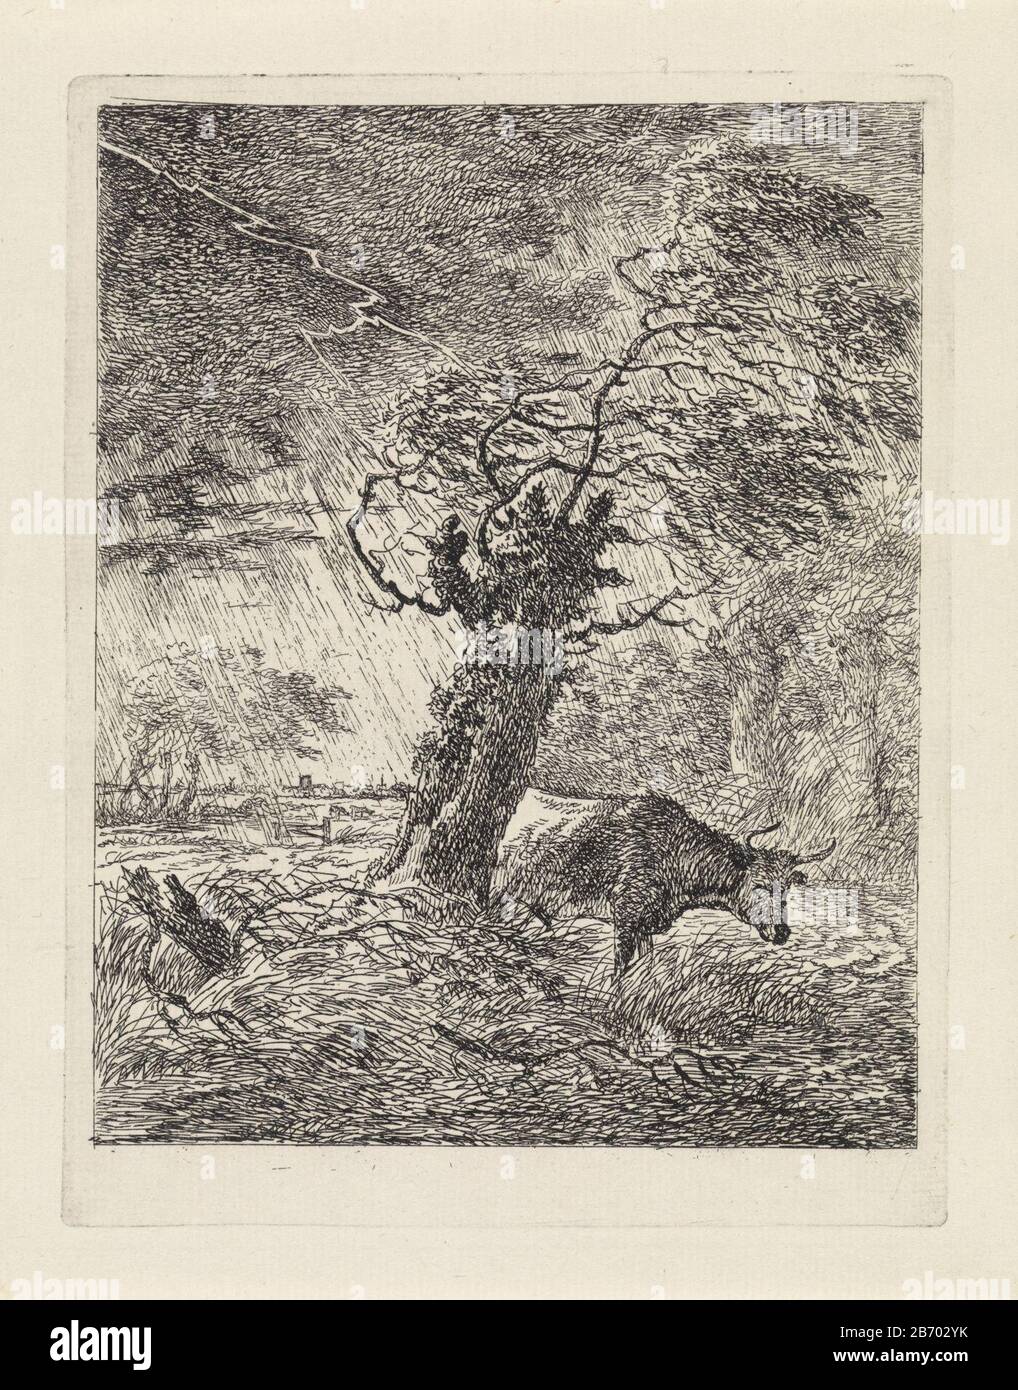 Koe bij een knotwilg Landschappen (serie B) (serietitel) In a landscape is a cow on a willow. The lightning, rain and waait. Manufacturer : printmaker: Gerard van Nijmegen Place manufacture: Rotterdam Date: 1790 Physical features: etching; proofing material: paper Technique: etching dimensions: plate edge: H 200 mm × W 153 mm Subject: lightning, flash of lightning, thunderboltregencowtrees: willow Stock Photo